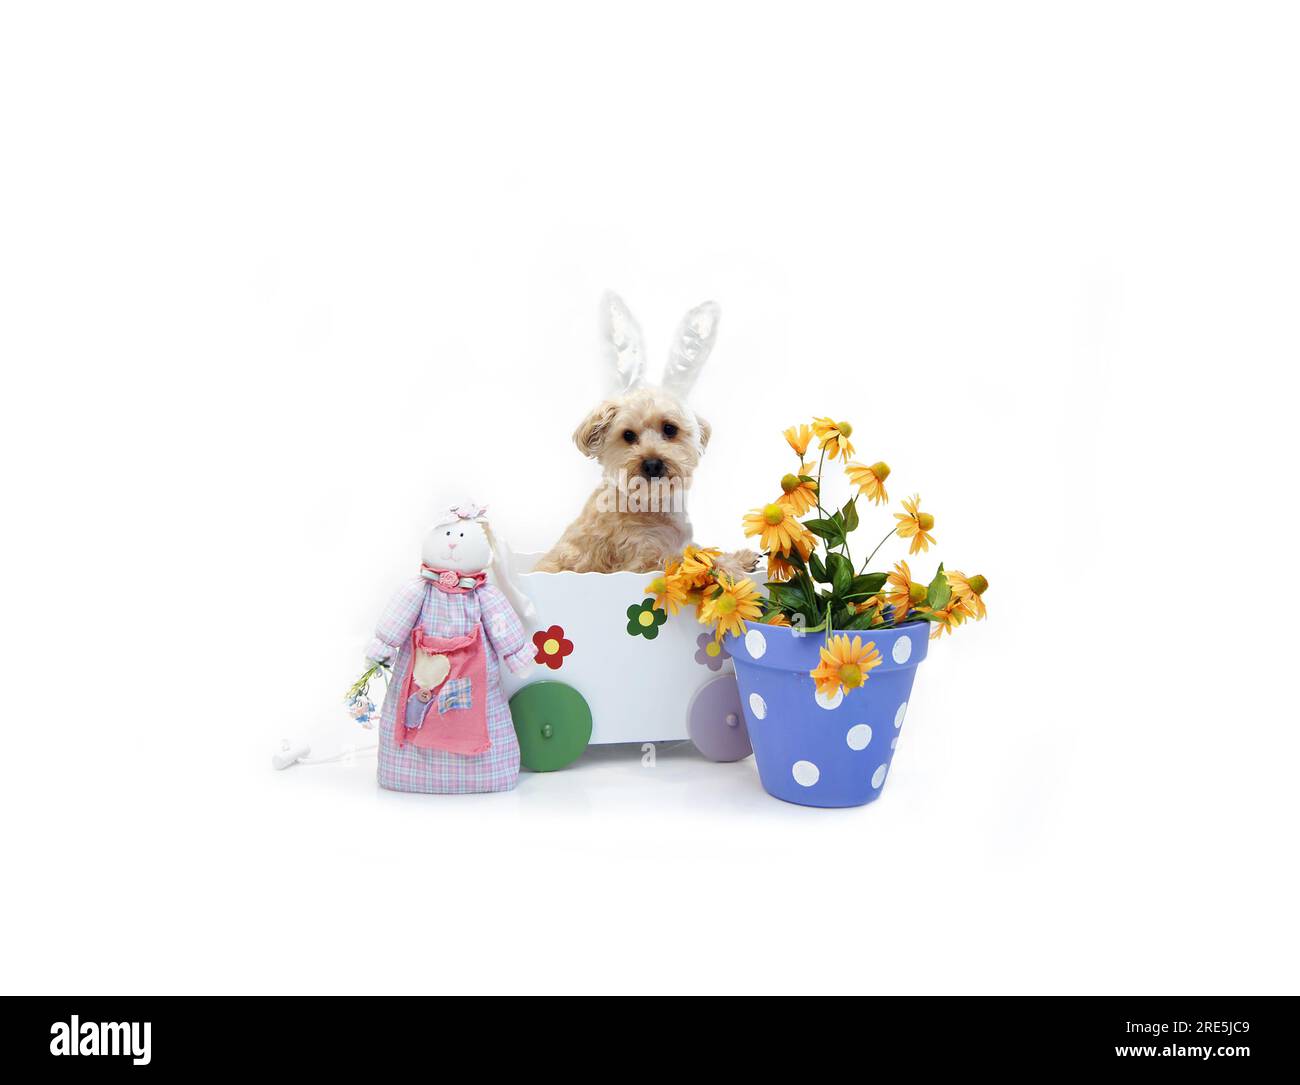 Easter Rabbit look-alike rides inside a white wooden wagon decorated with flowers.  Silky Poo is wearing easter rabbit ears. Stock Photo